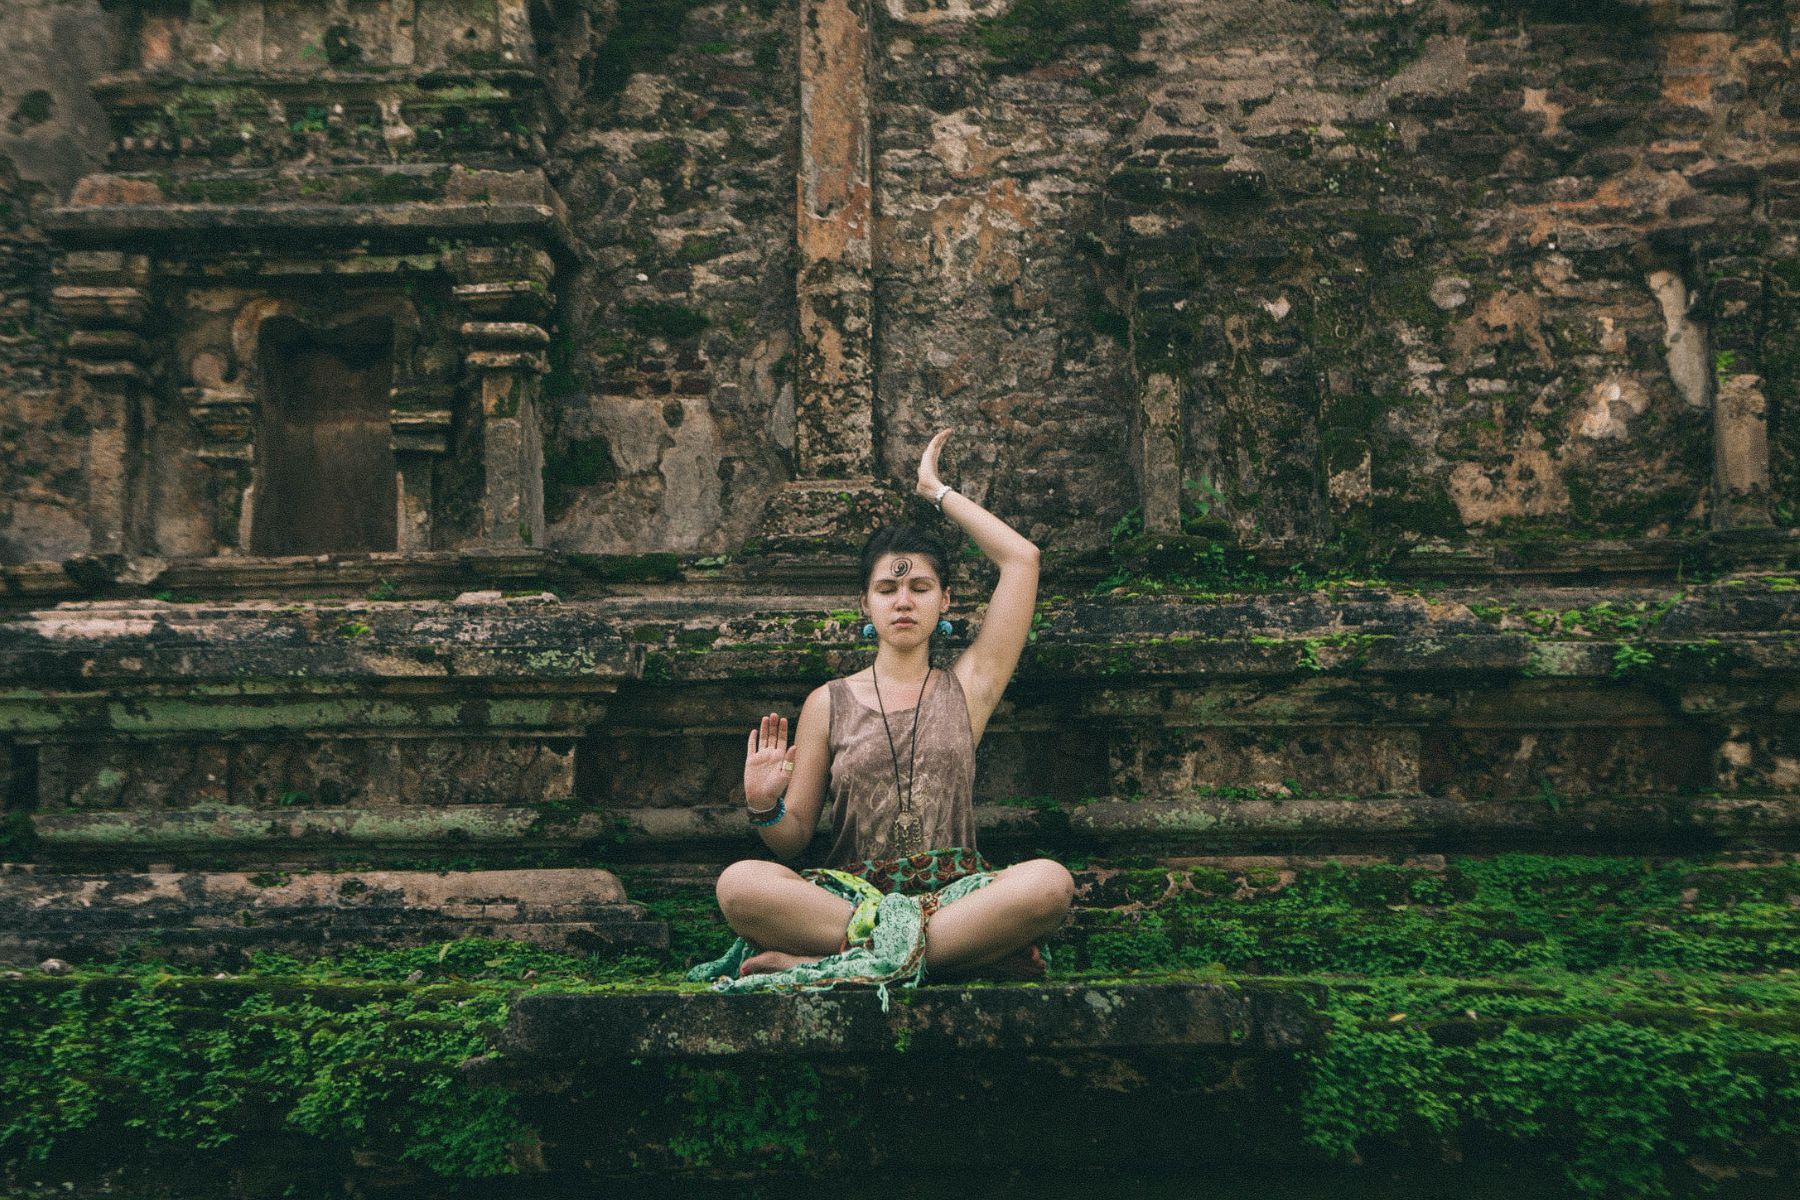 the girl sits in a lotus pose and meditates against the background of the ancient temple on Sri Lanka